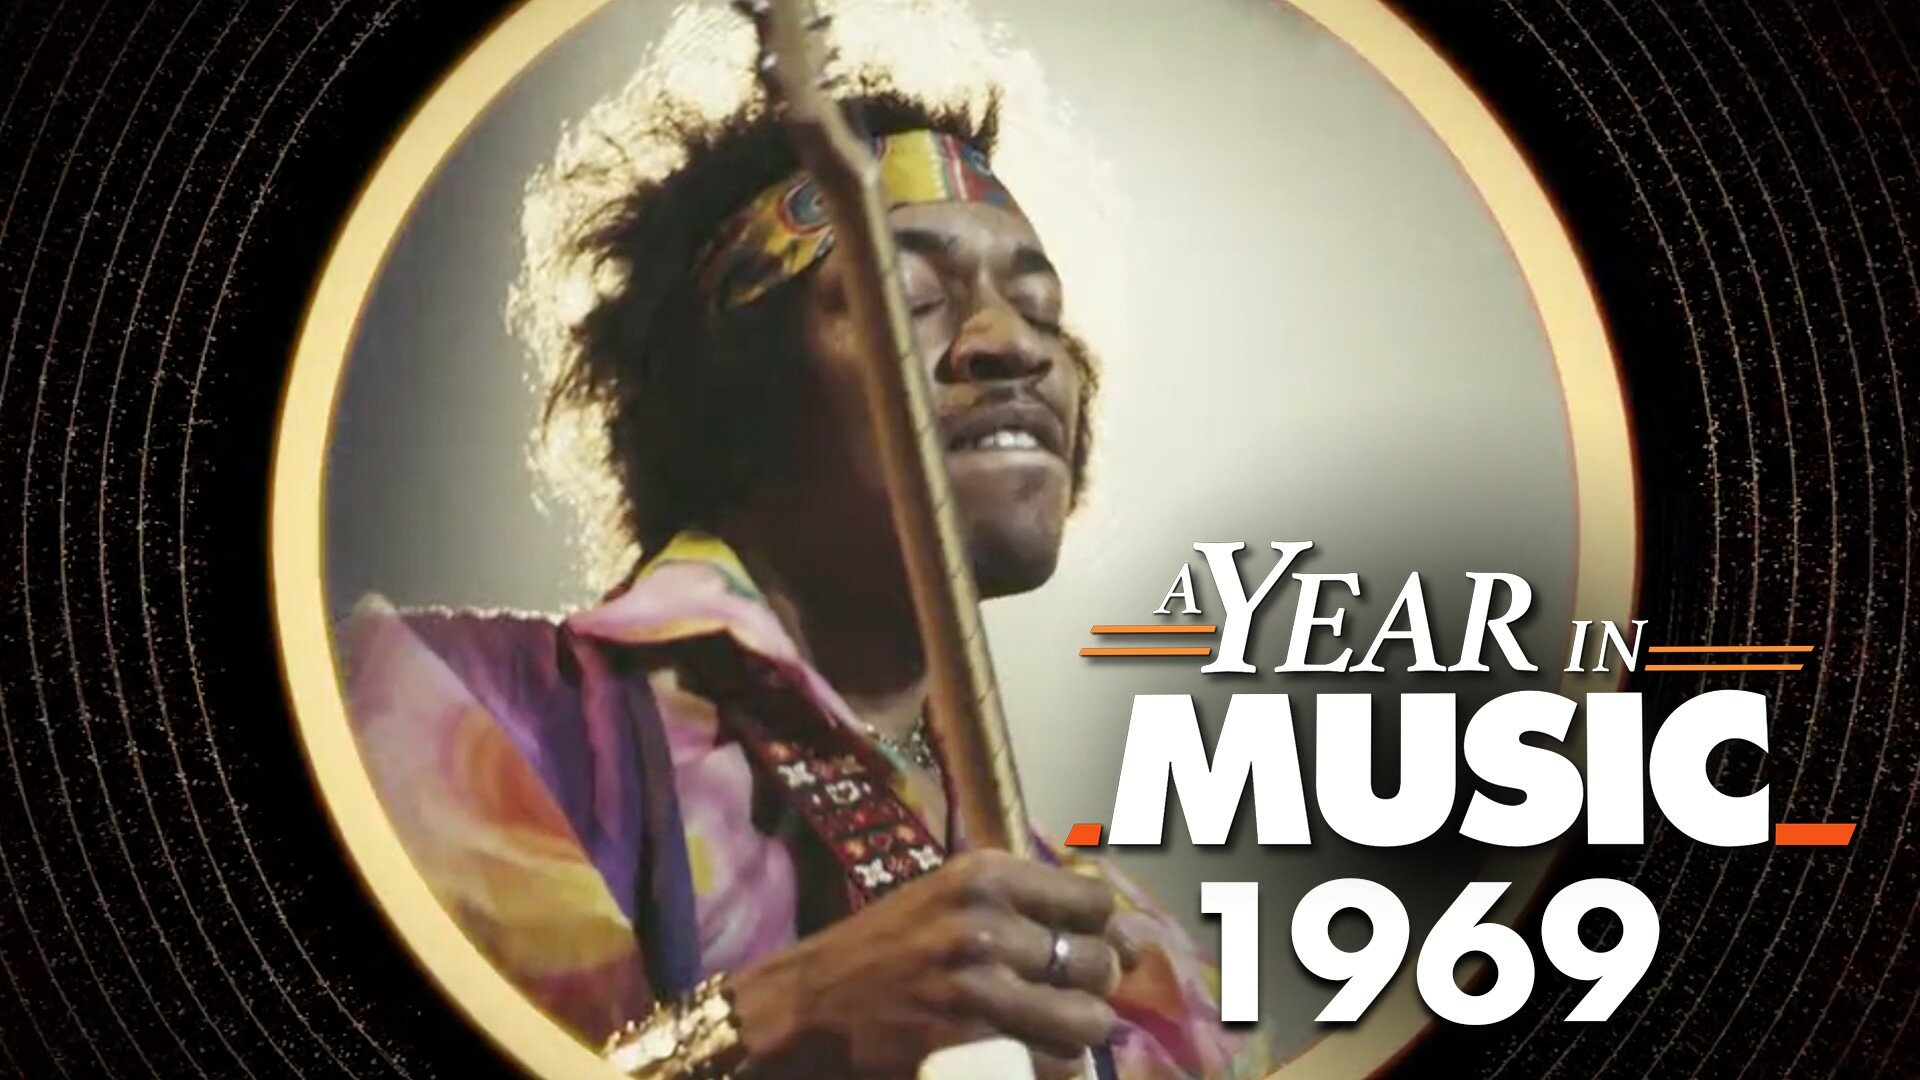 A Year in Music S1E3 1969